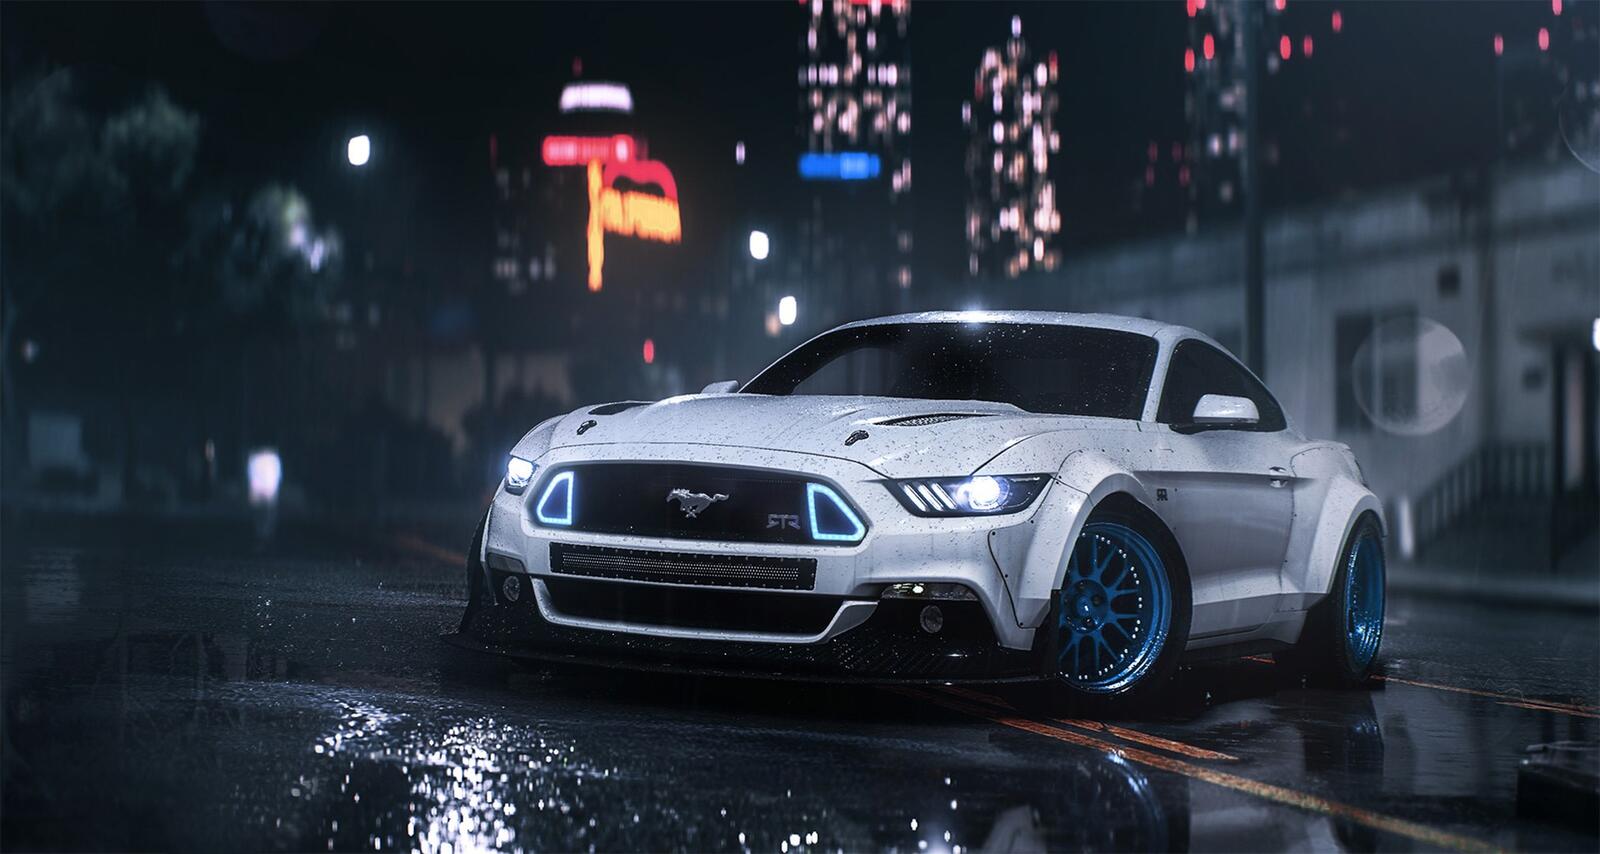 Wallpapers Need For Speed Mustang Cars on the desktop